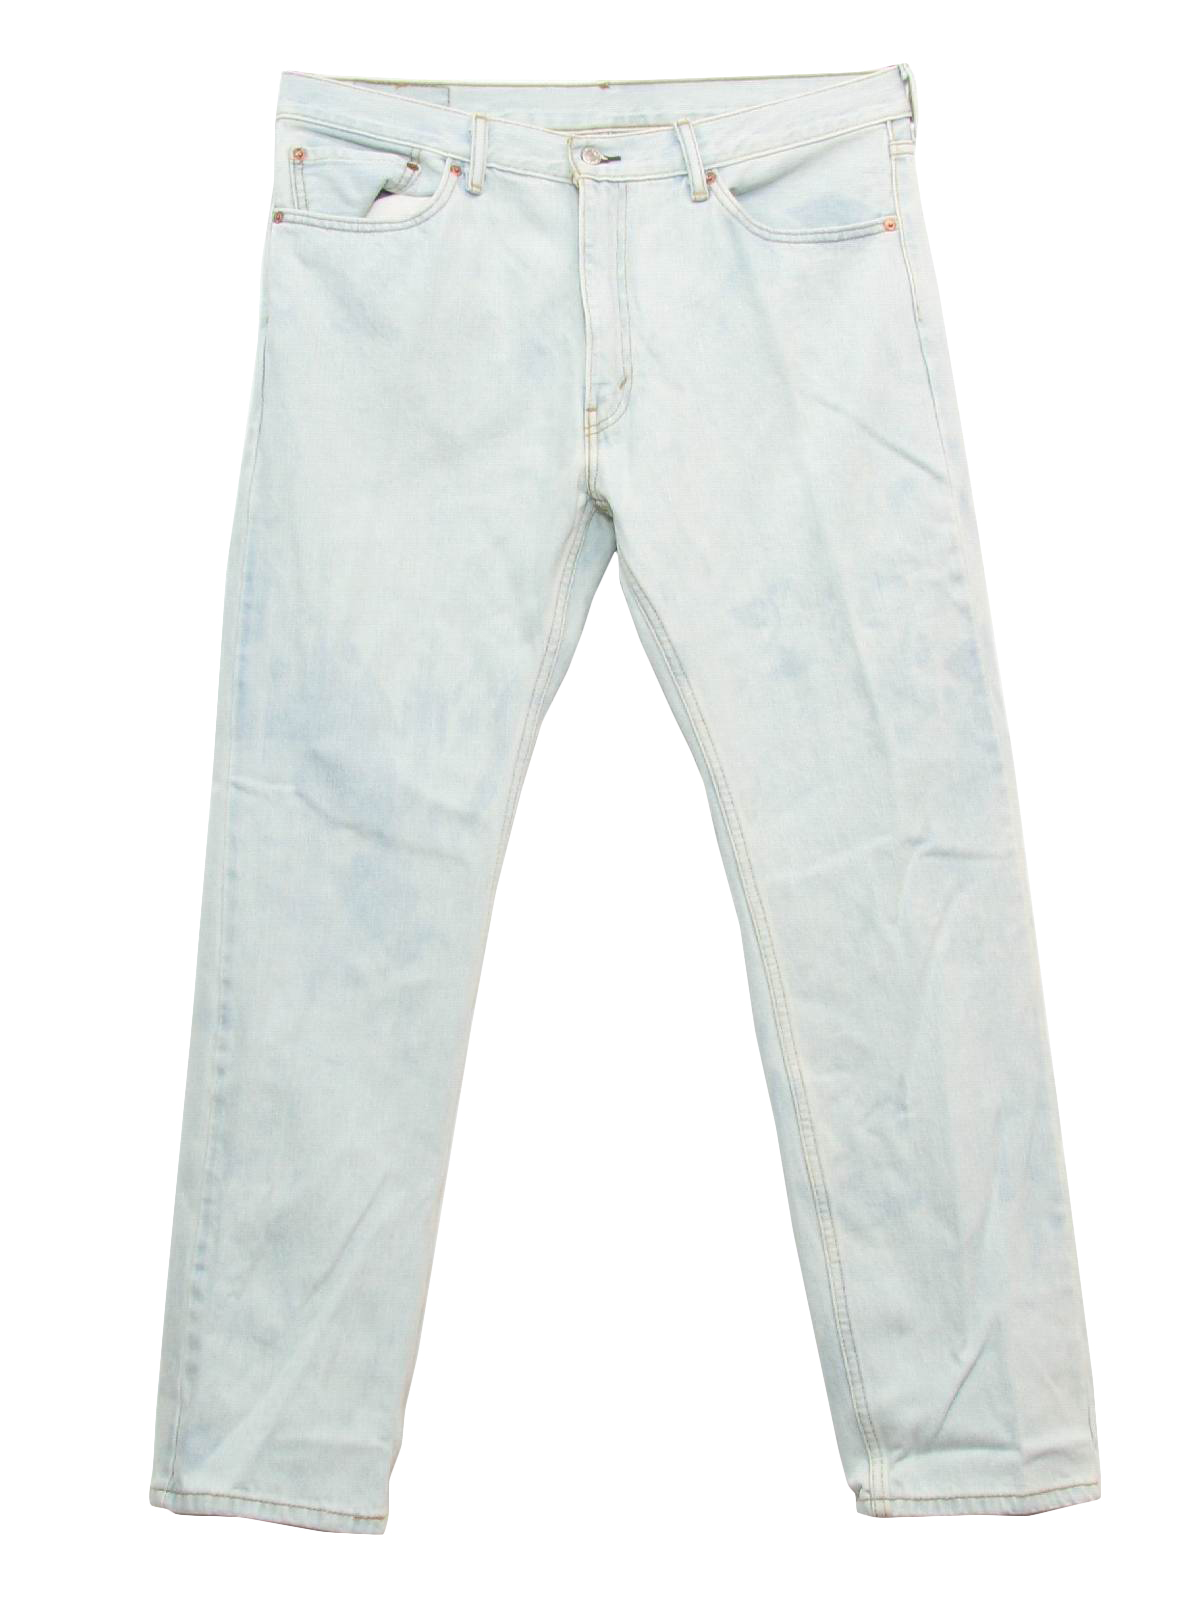 levi white washed jeans